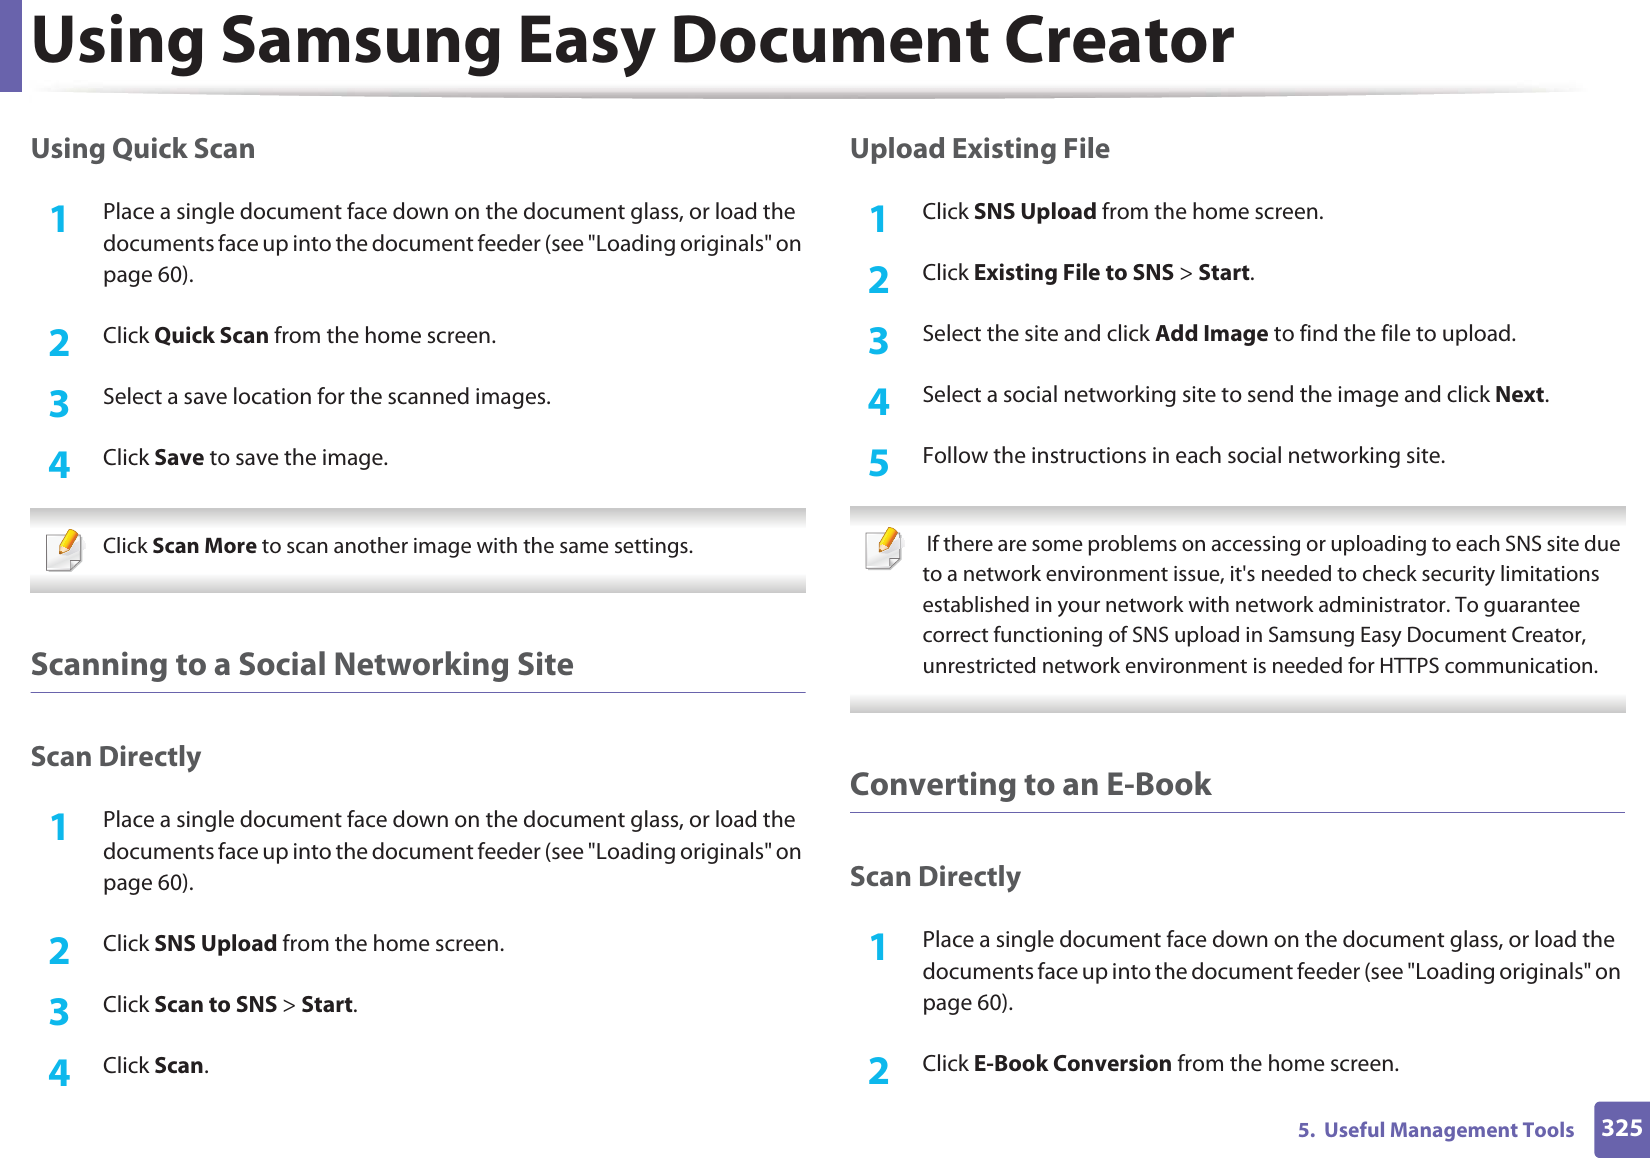 Using Samsung Easy Document Creator3255.  Useful Management ToolsUsing Quick Scan1Place a single document face down on the document glass, or load the documents face up into the document feeder (see &quot;Loading originals&quot; on page 60).2  Click Quick Scan from the home screen.3  Select a save location for the scanned images.4  Click Save to save the image. Click Scan More to scan another image with the same settings. Scanning to a Social Networking SiteScan Directly1Place a single document face down on the document glass, or load the documents face up into the document feeder (see &quot;Loading originals&quot; on page 60).2  Click SNS Upload from the home screen.3  Click Scan to SNS &gt; Start.4  Click Scan.Upload Existing File1Click SNS Upload from the home screen.2  Click Existing File to SNS &gt; Start.3  Select the site and click Add Image to find the file to upload.4  Select a social networking site to send the image and click Next. 5  Follow the instructions in each social networking site.  If there are some problems on accessing or uploading to each SNS site due to a network environment issue, it&apos;s needed to check security limitations established in your network with network administrator. To guarantee correct functioning of SNS upload in Samsung Easy Document Creator, unrestricted network environment is needed for HTTPS communication. Converting to an E-BookScan Directly1Place a single document face down on the document glass, or load the documents face up into the document feeder (see &quot;Loading originals&quot; on page 60).2  Click E-Book Conversion from the home screen.